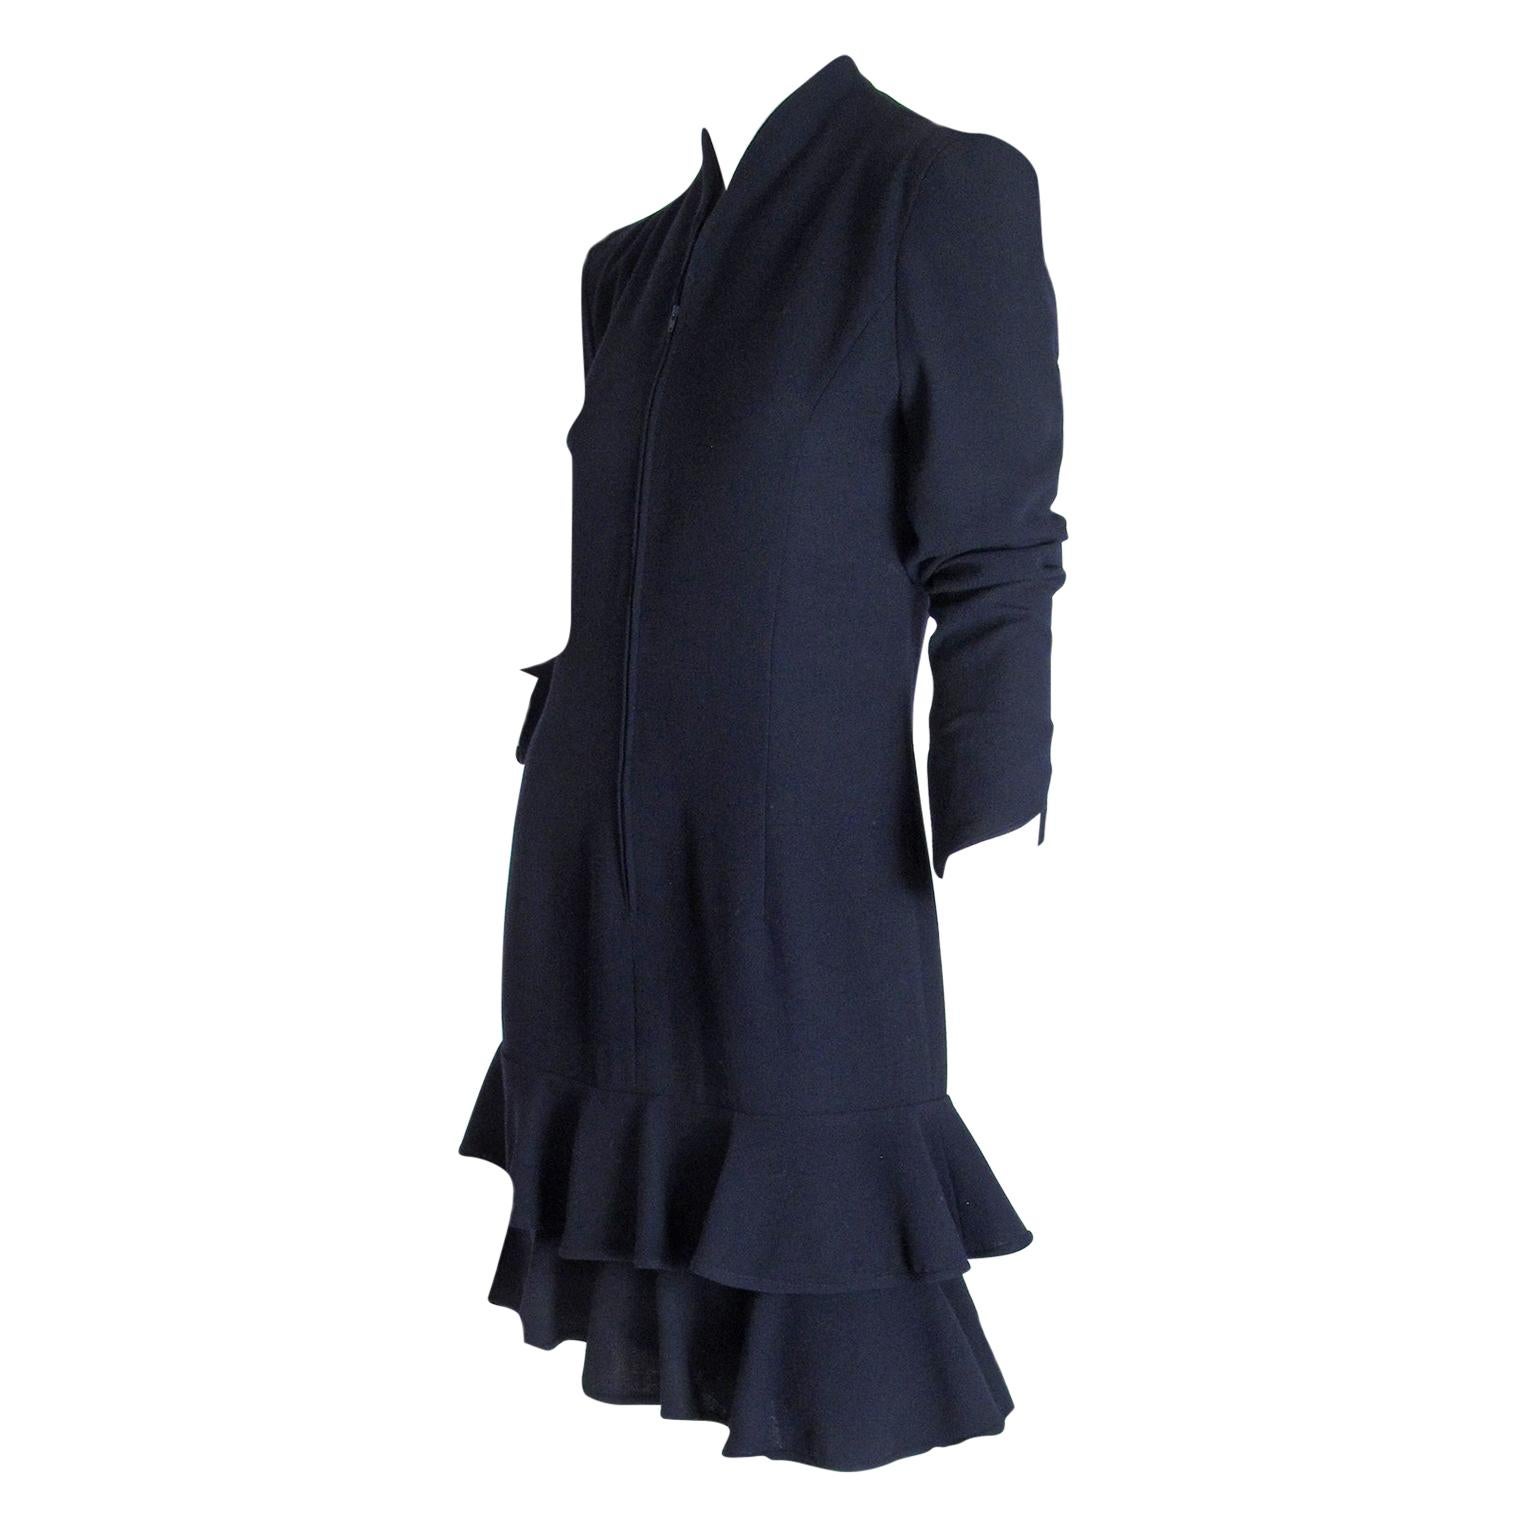 Valentino Navy Dress with Zipper Front and Ruffles